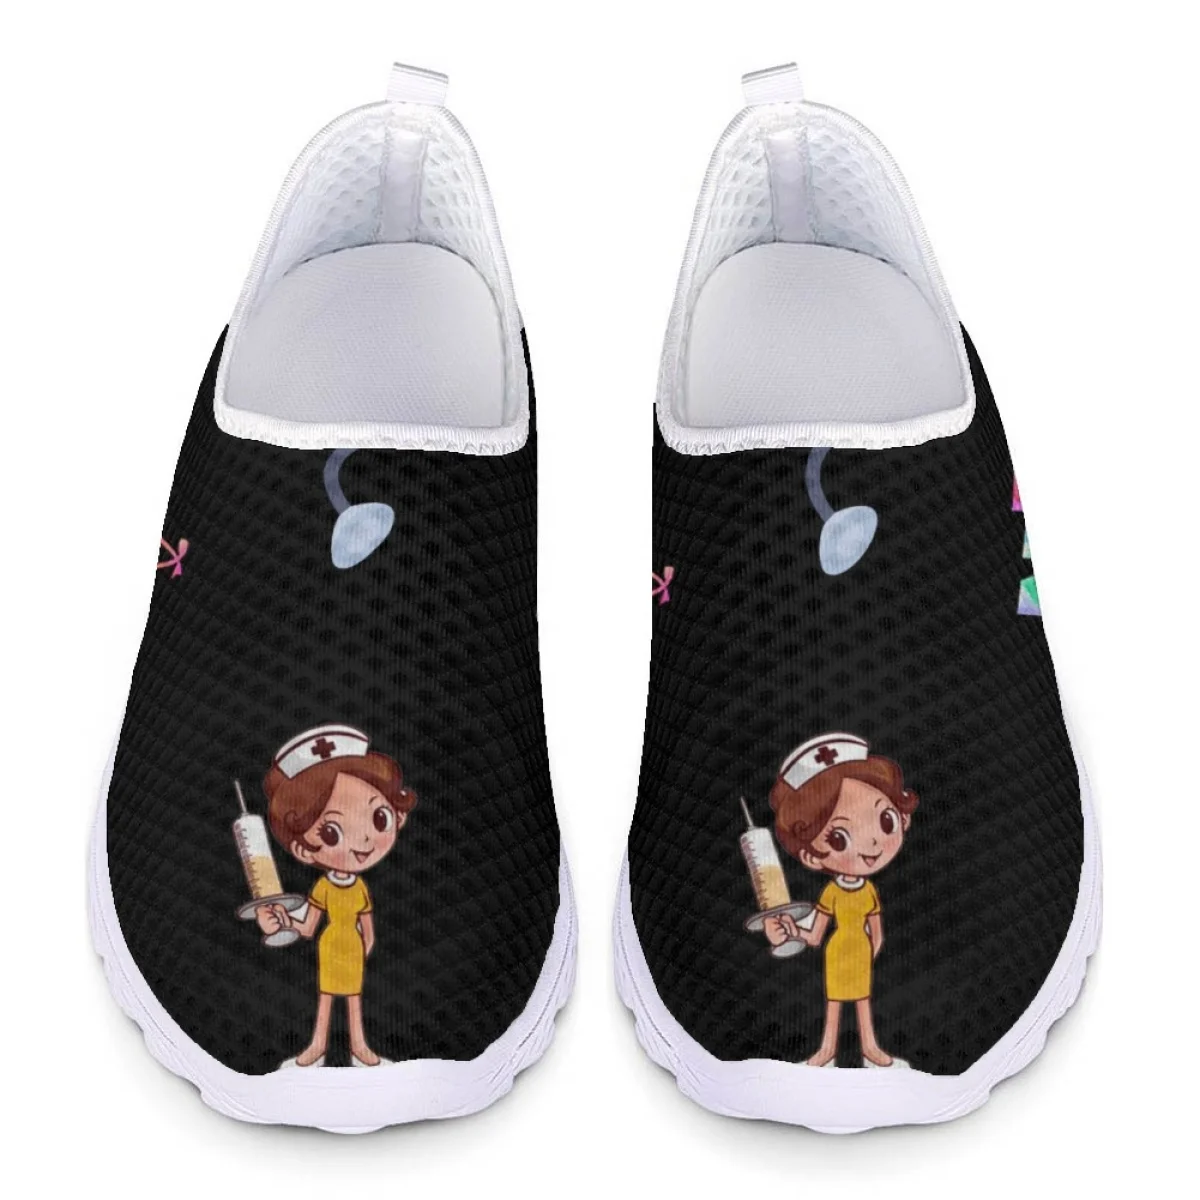 

Belidome Cute Cartoon Nurse Medical Shoes for Women Summer Mesh Soft Brand Design Slip On Casual Walking Sneakers Zapatos Planos